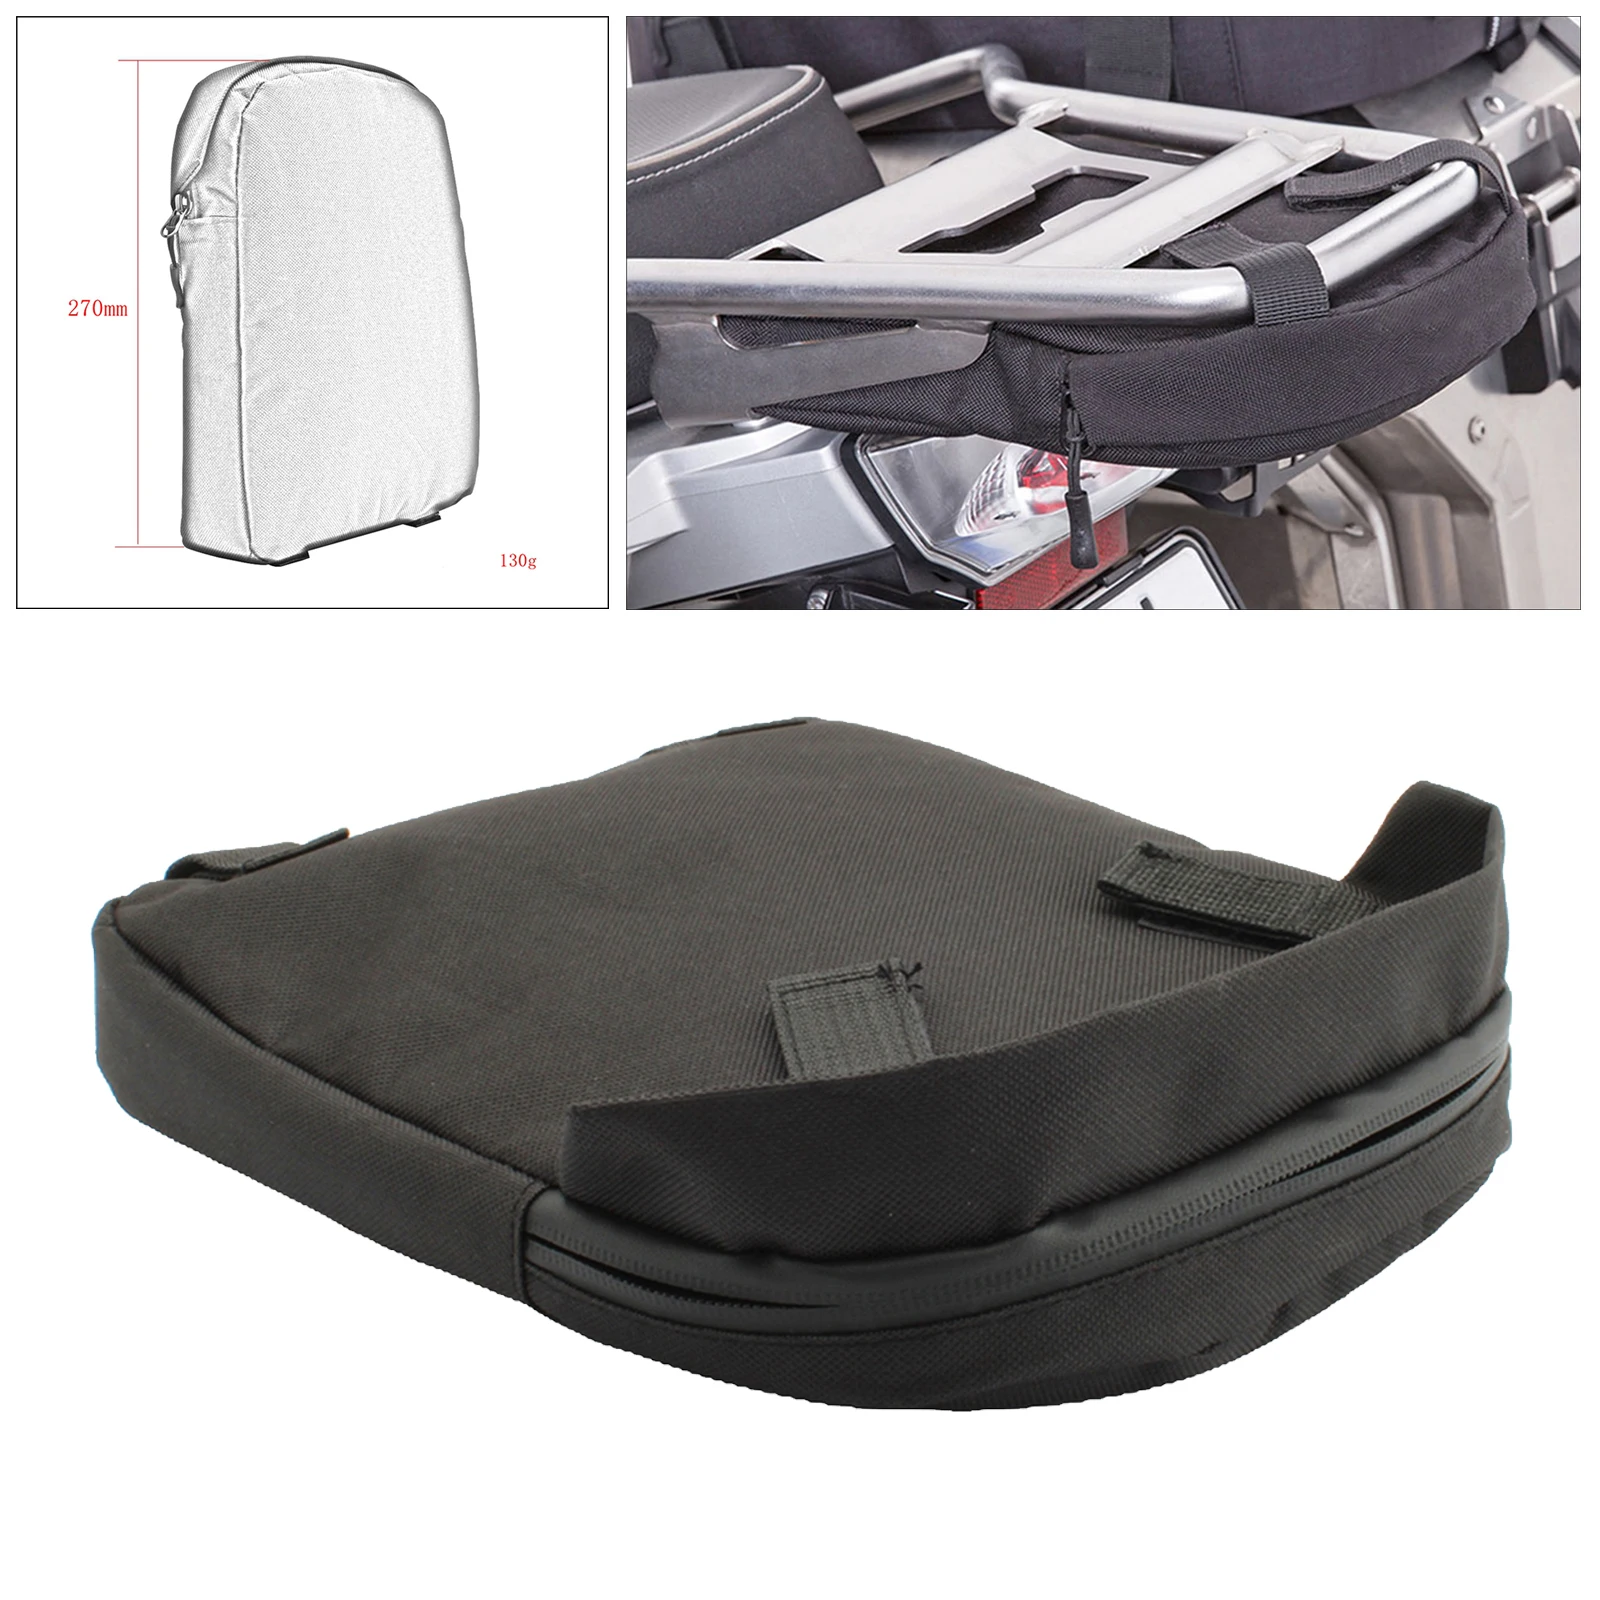 Waterproof Motorcycle Rear Under Luggage Rack Bag Tail Bag Storage Case For BMW R1250 GS Adventure R1200 GS LC Adv (2014-)